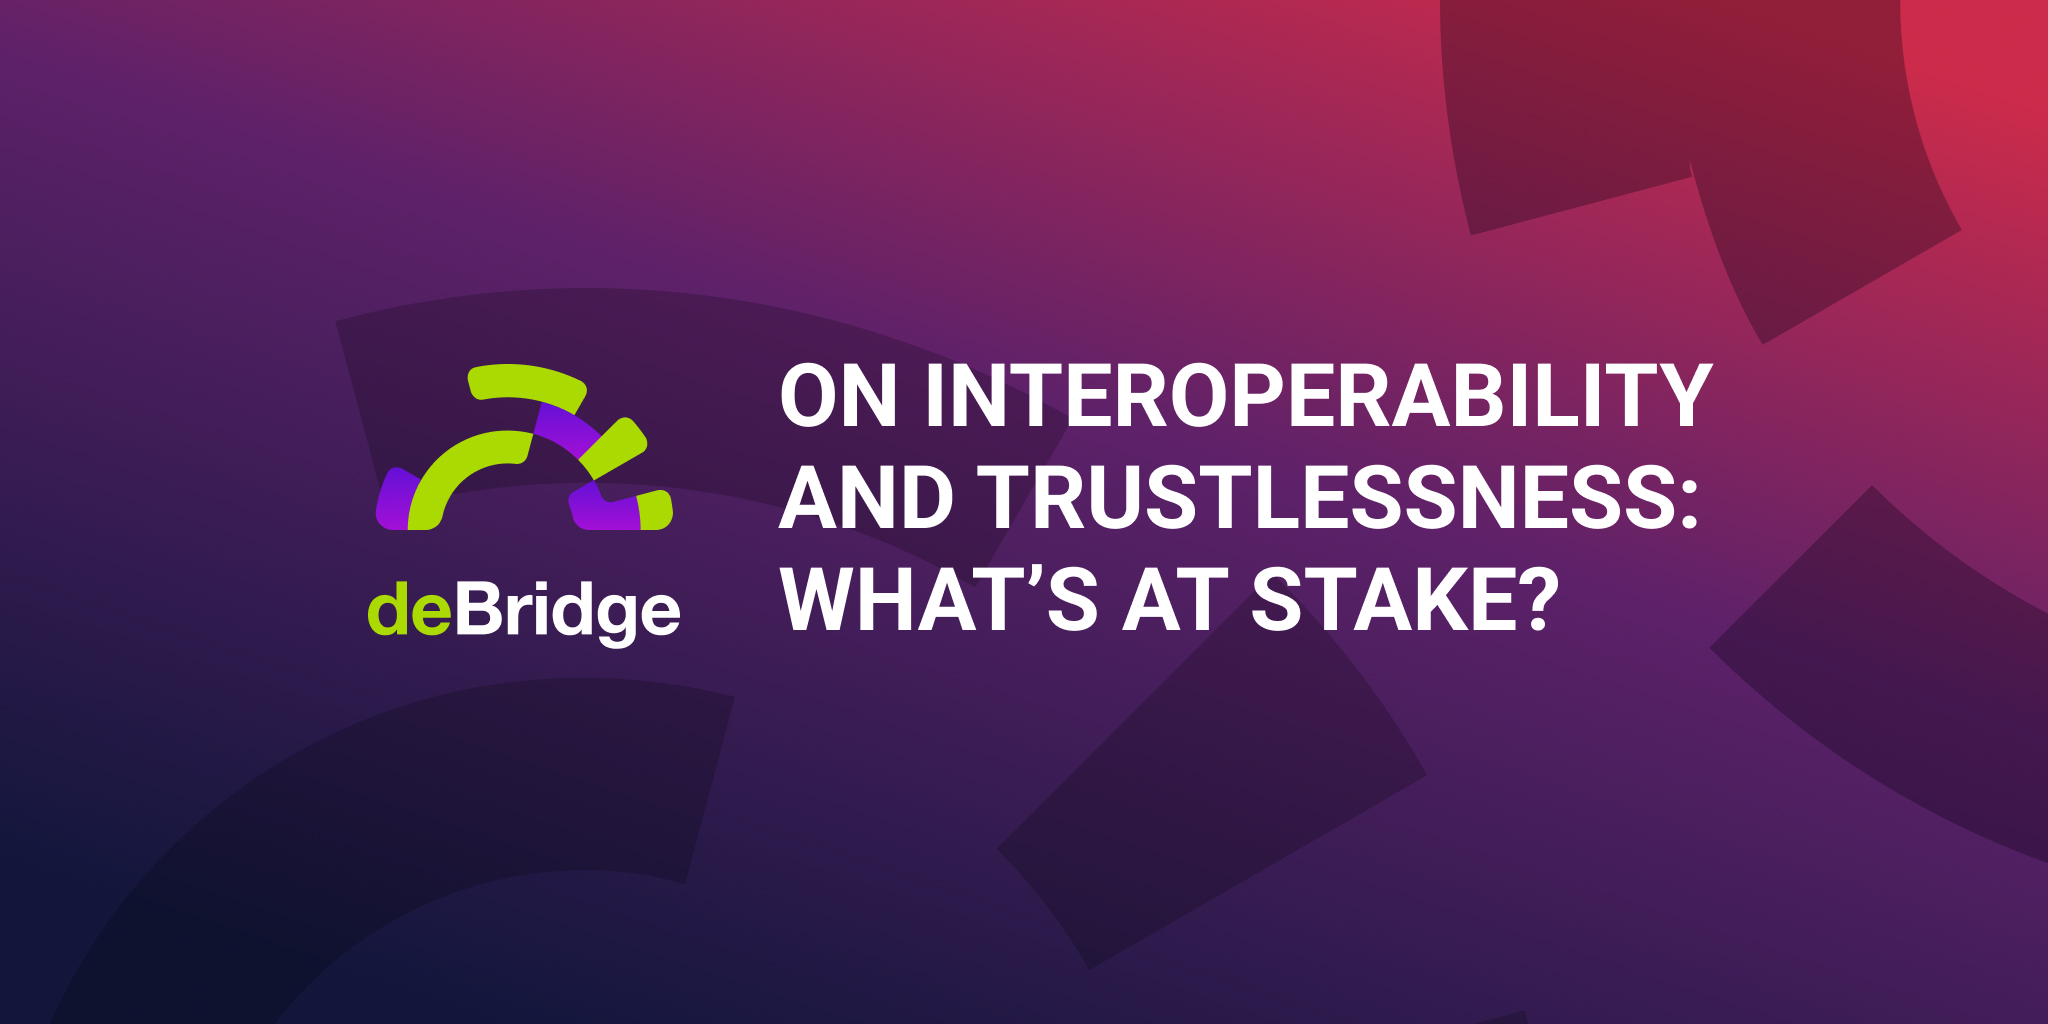 On Interoperability and Trustlessness: What’s at stake?